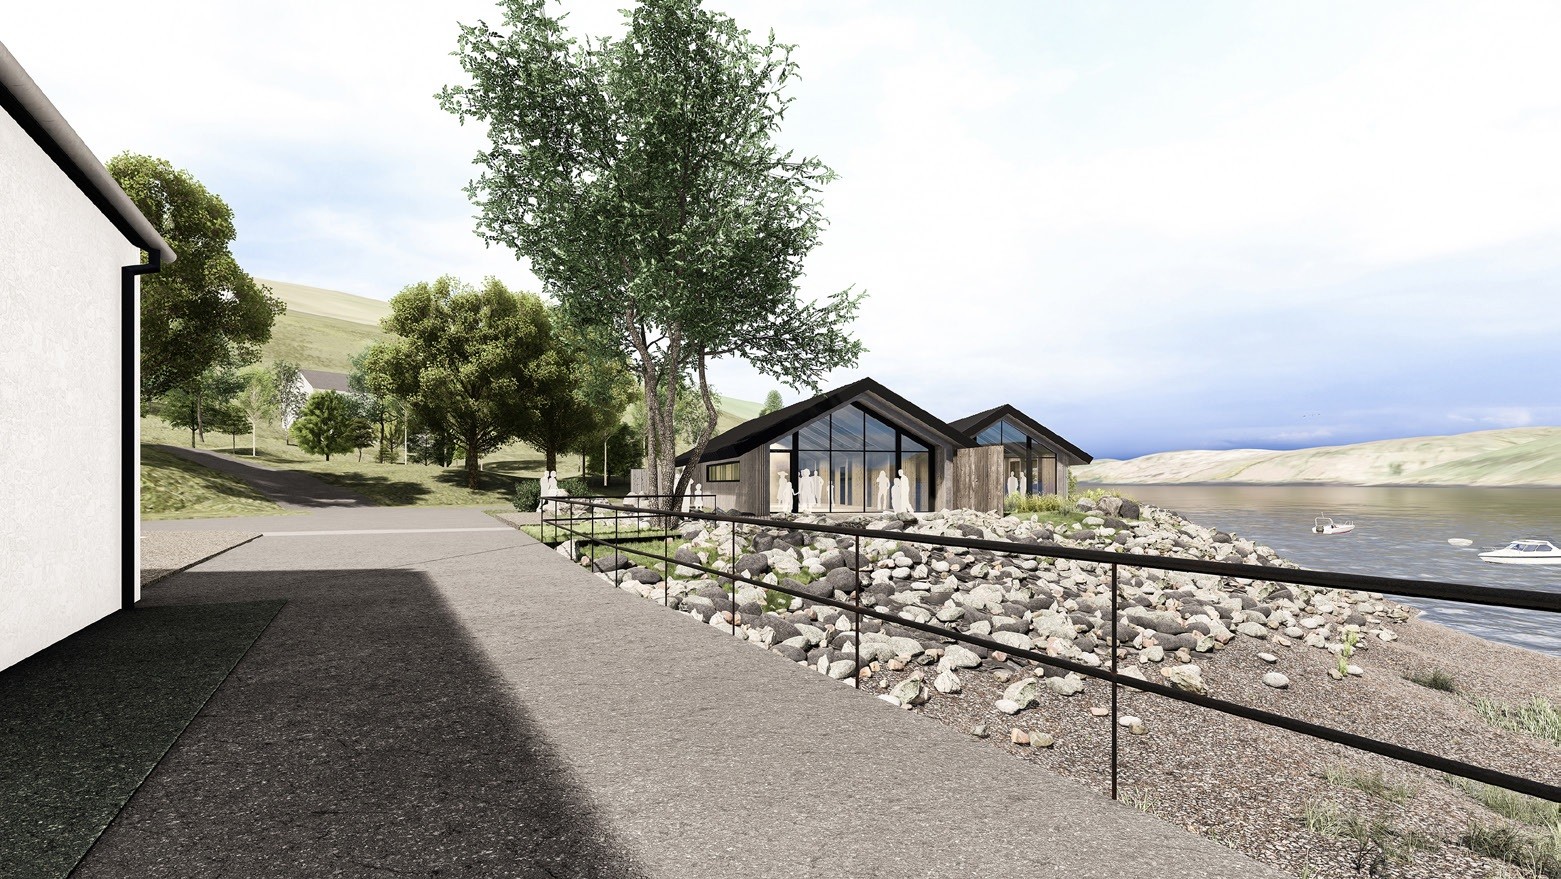 New cafe and visitor centre planned at Talisker Distillery on Skye